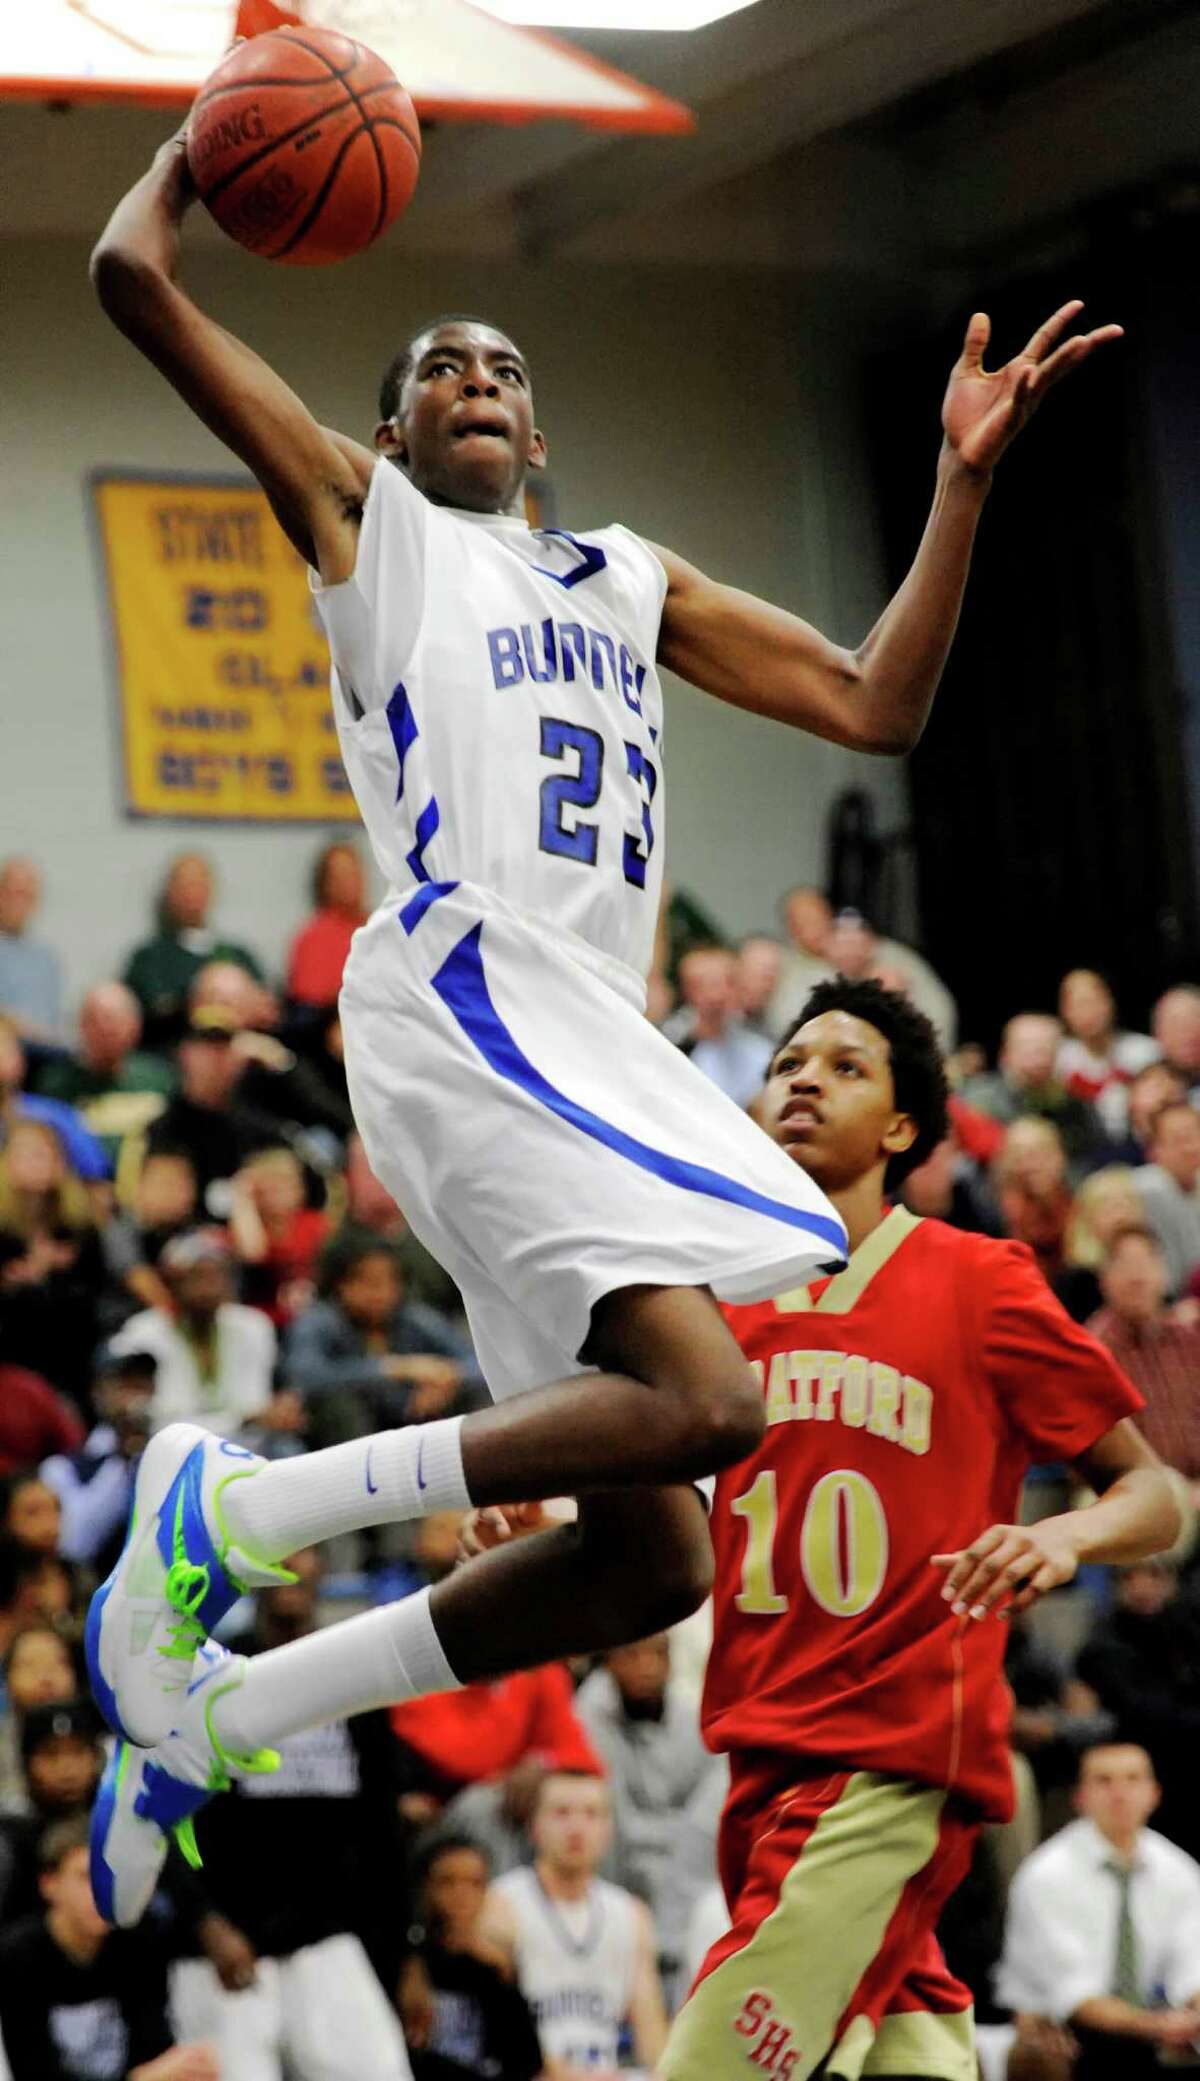 Bunnell high school's Issac Vann goes up to dunk the ball in a boys basketball game against Stratford high school played at Bunnell high school, Stratford, CT on Saturday, December 22nd, 2012.